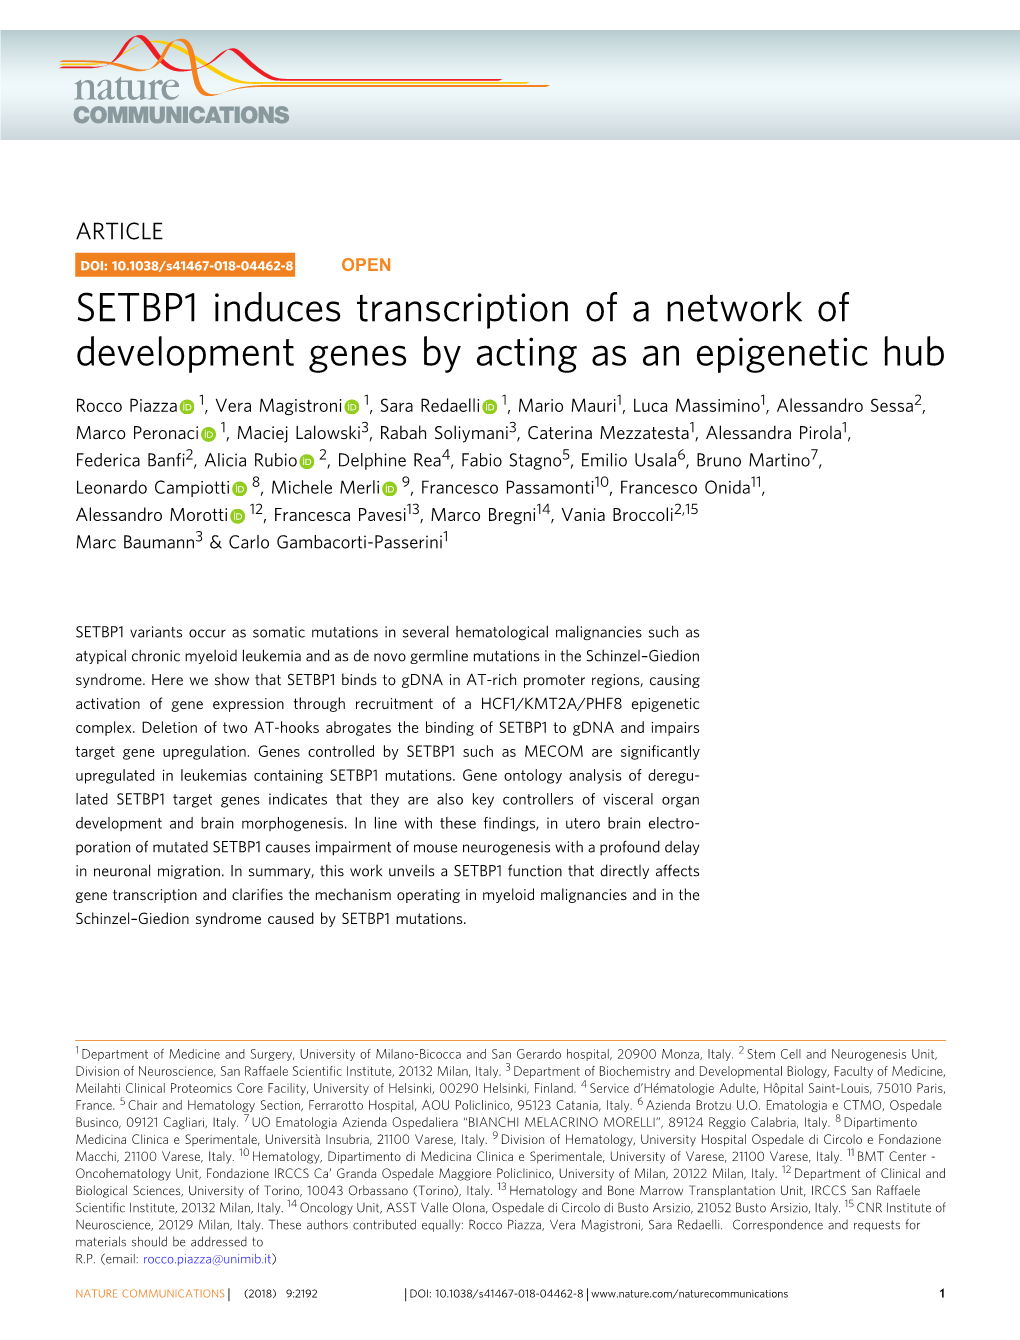 SETBP1 Induces Transcription of a Network of Development Genes by Acting As an Epigenetic Hub